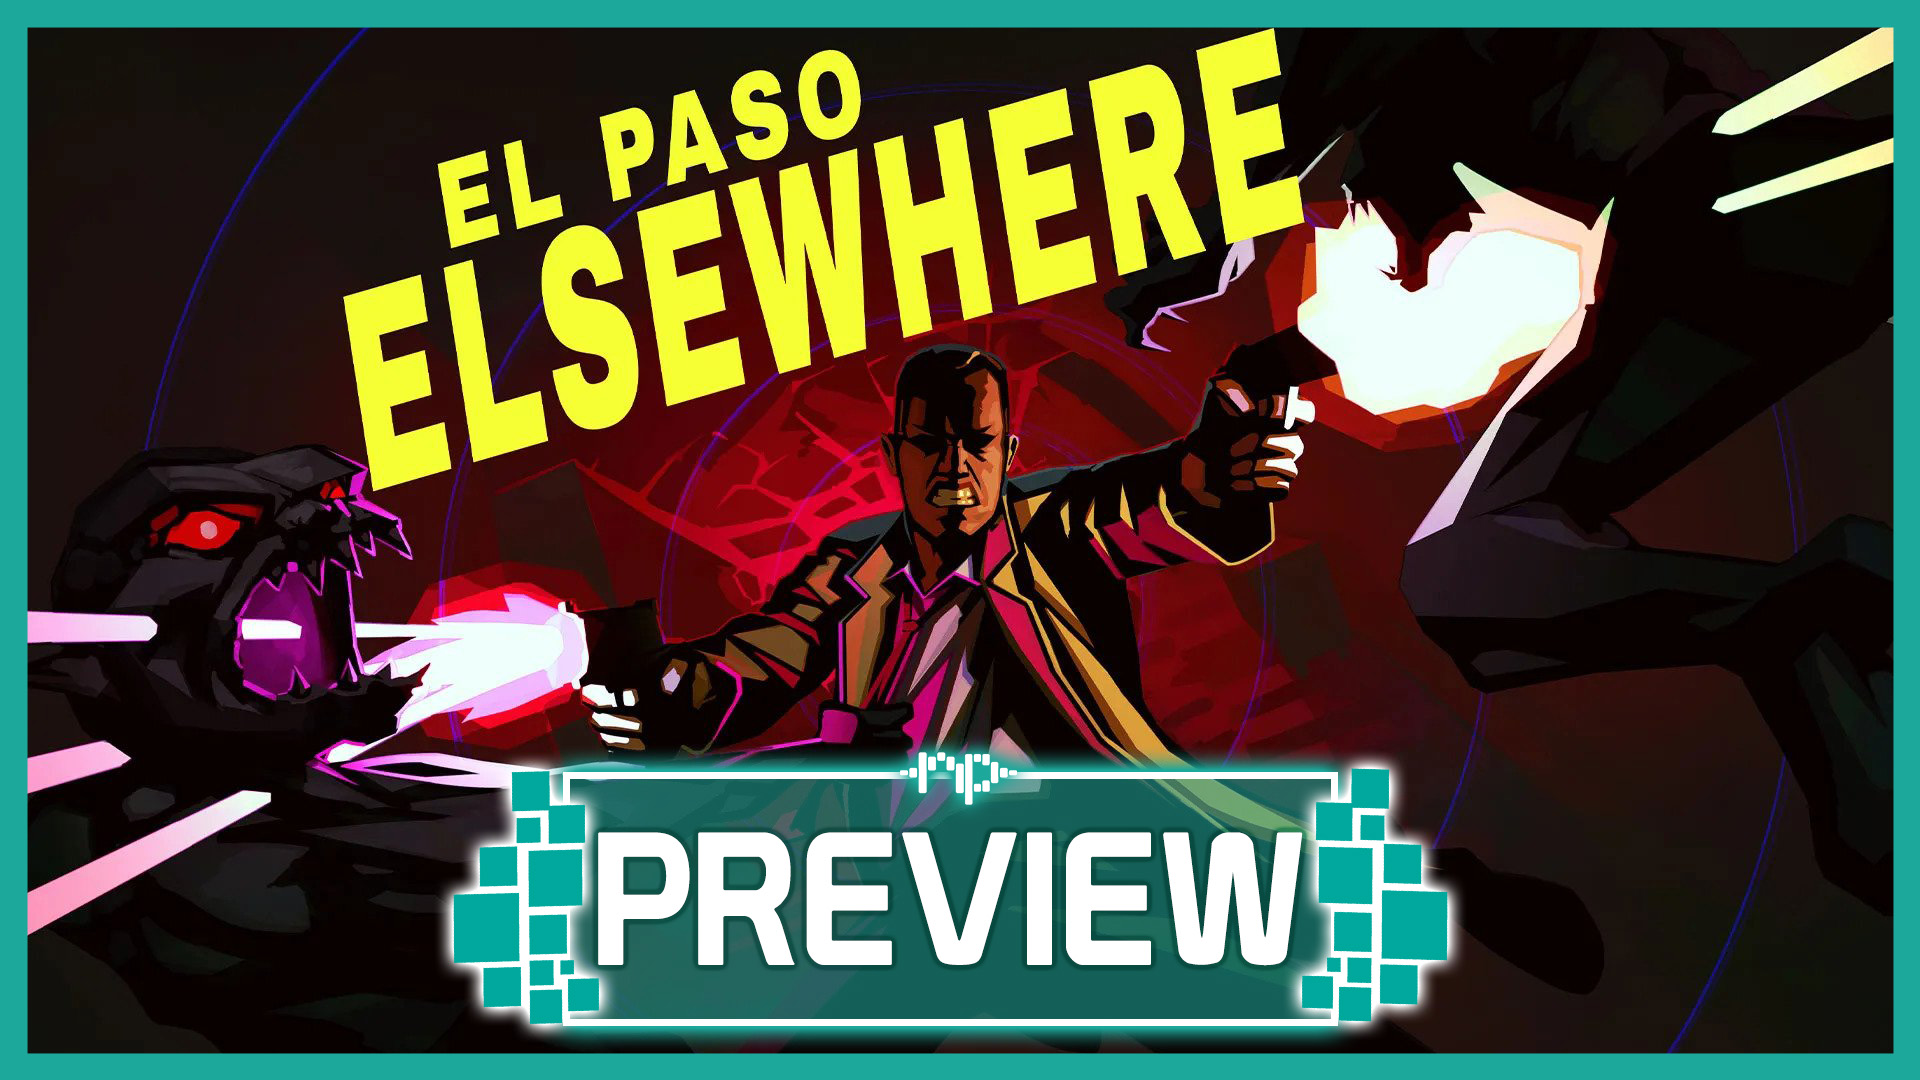 El Paso, Elsewhere Preview – Neo Slow-Mo